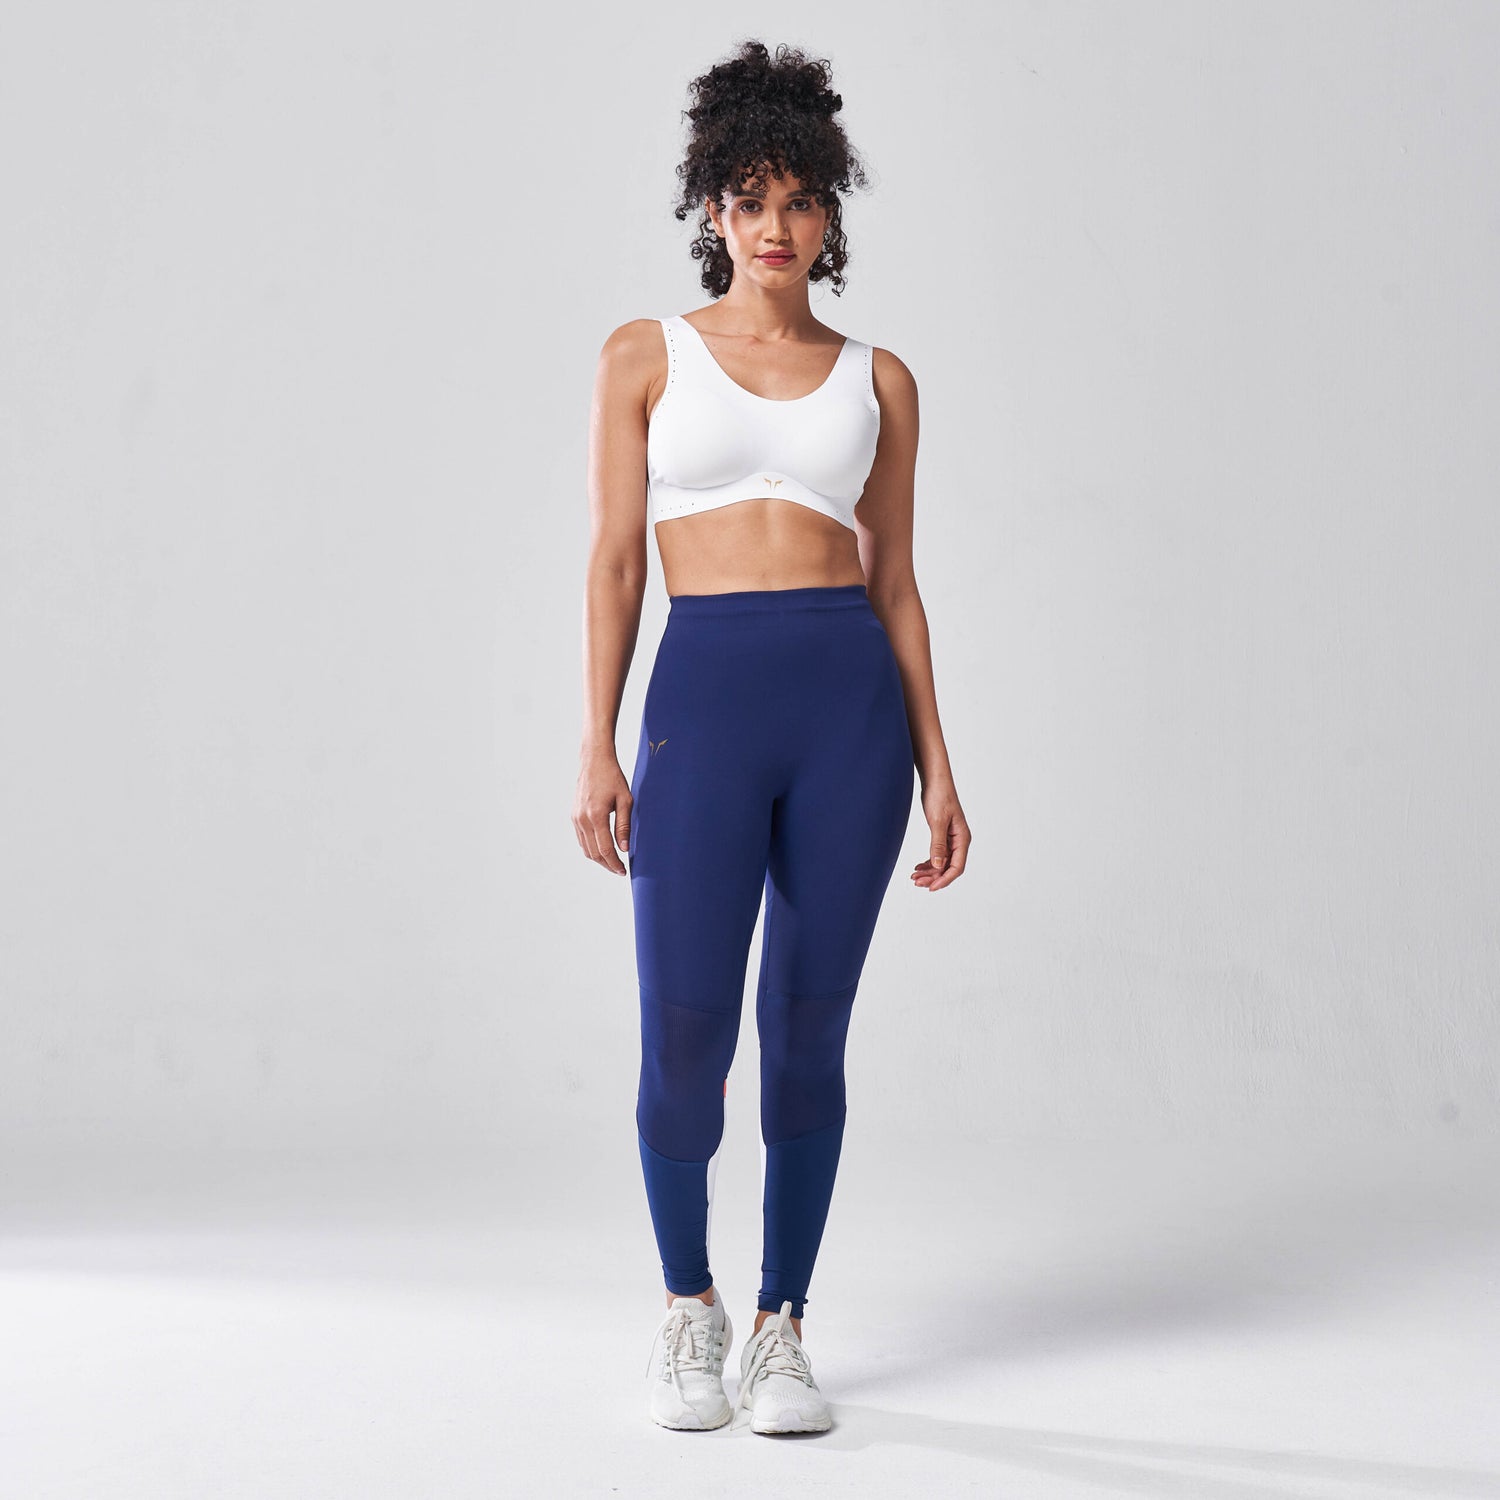 squatwolf-workout-clothes-lab-360-act-leggings-blue-gym-leggings-for-women